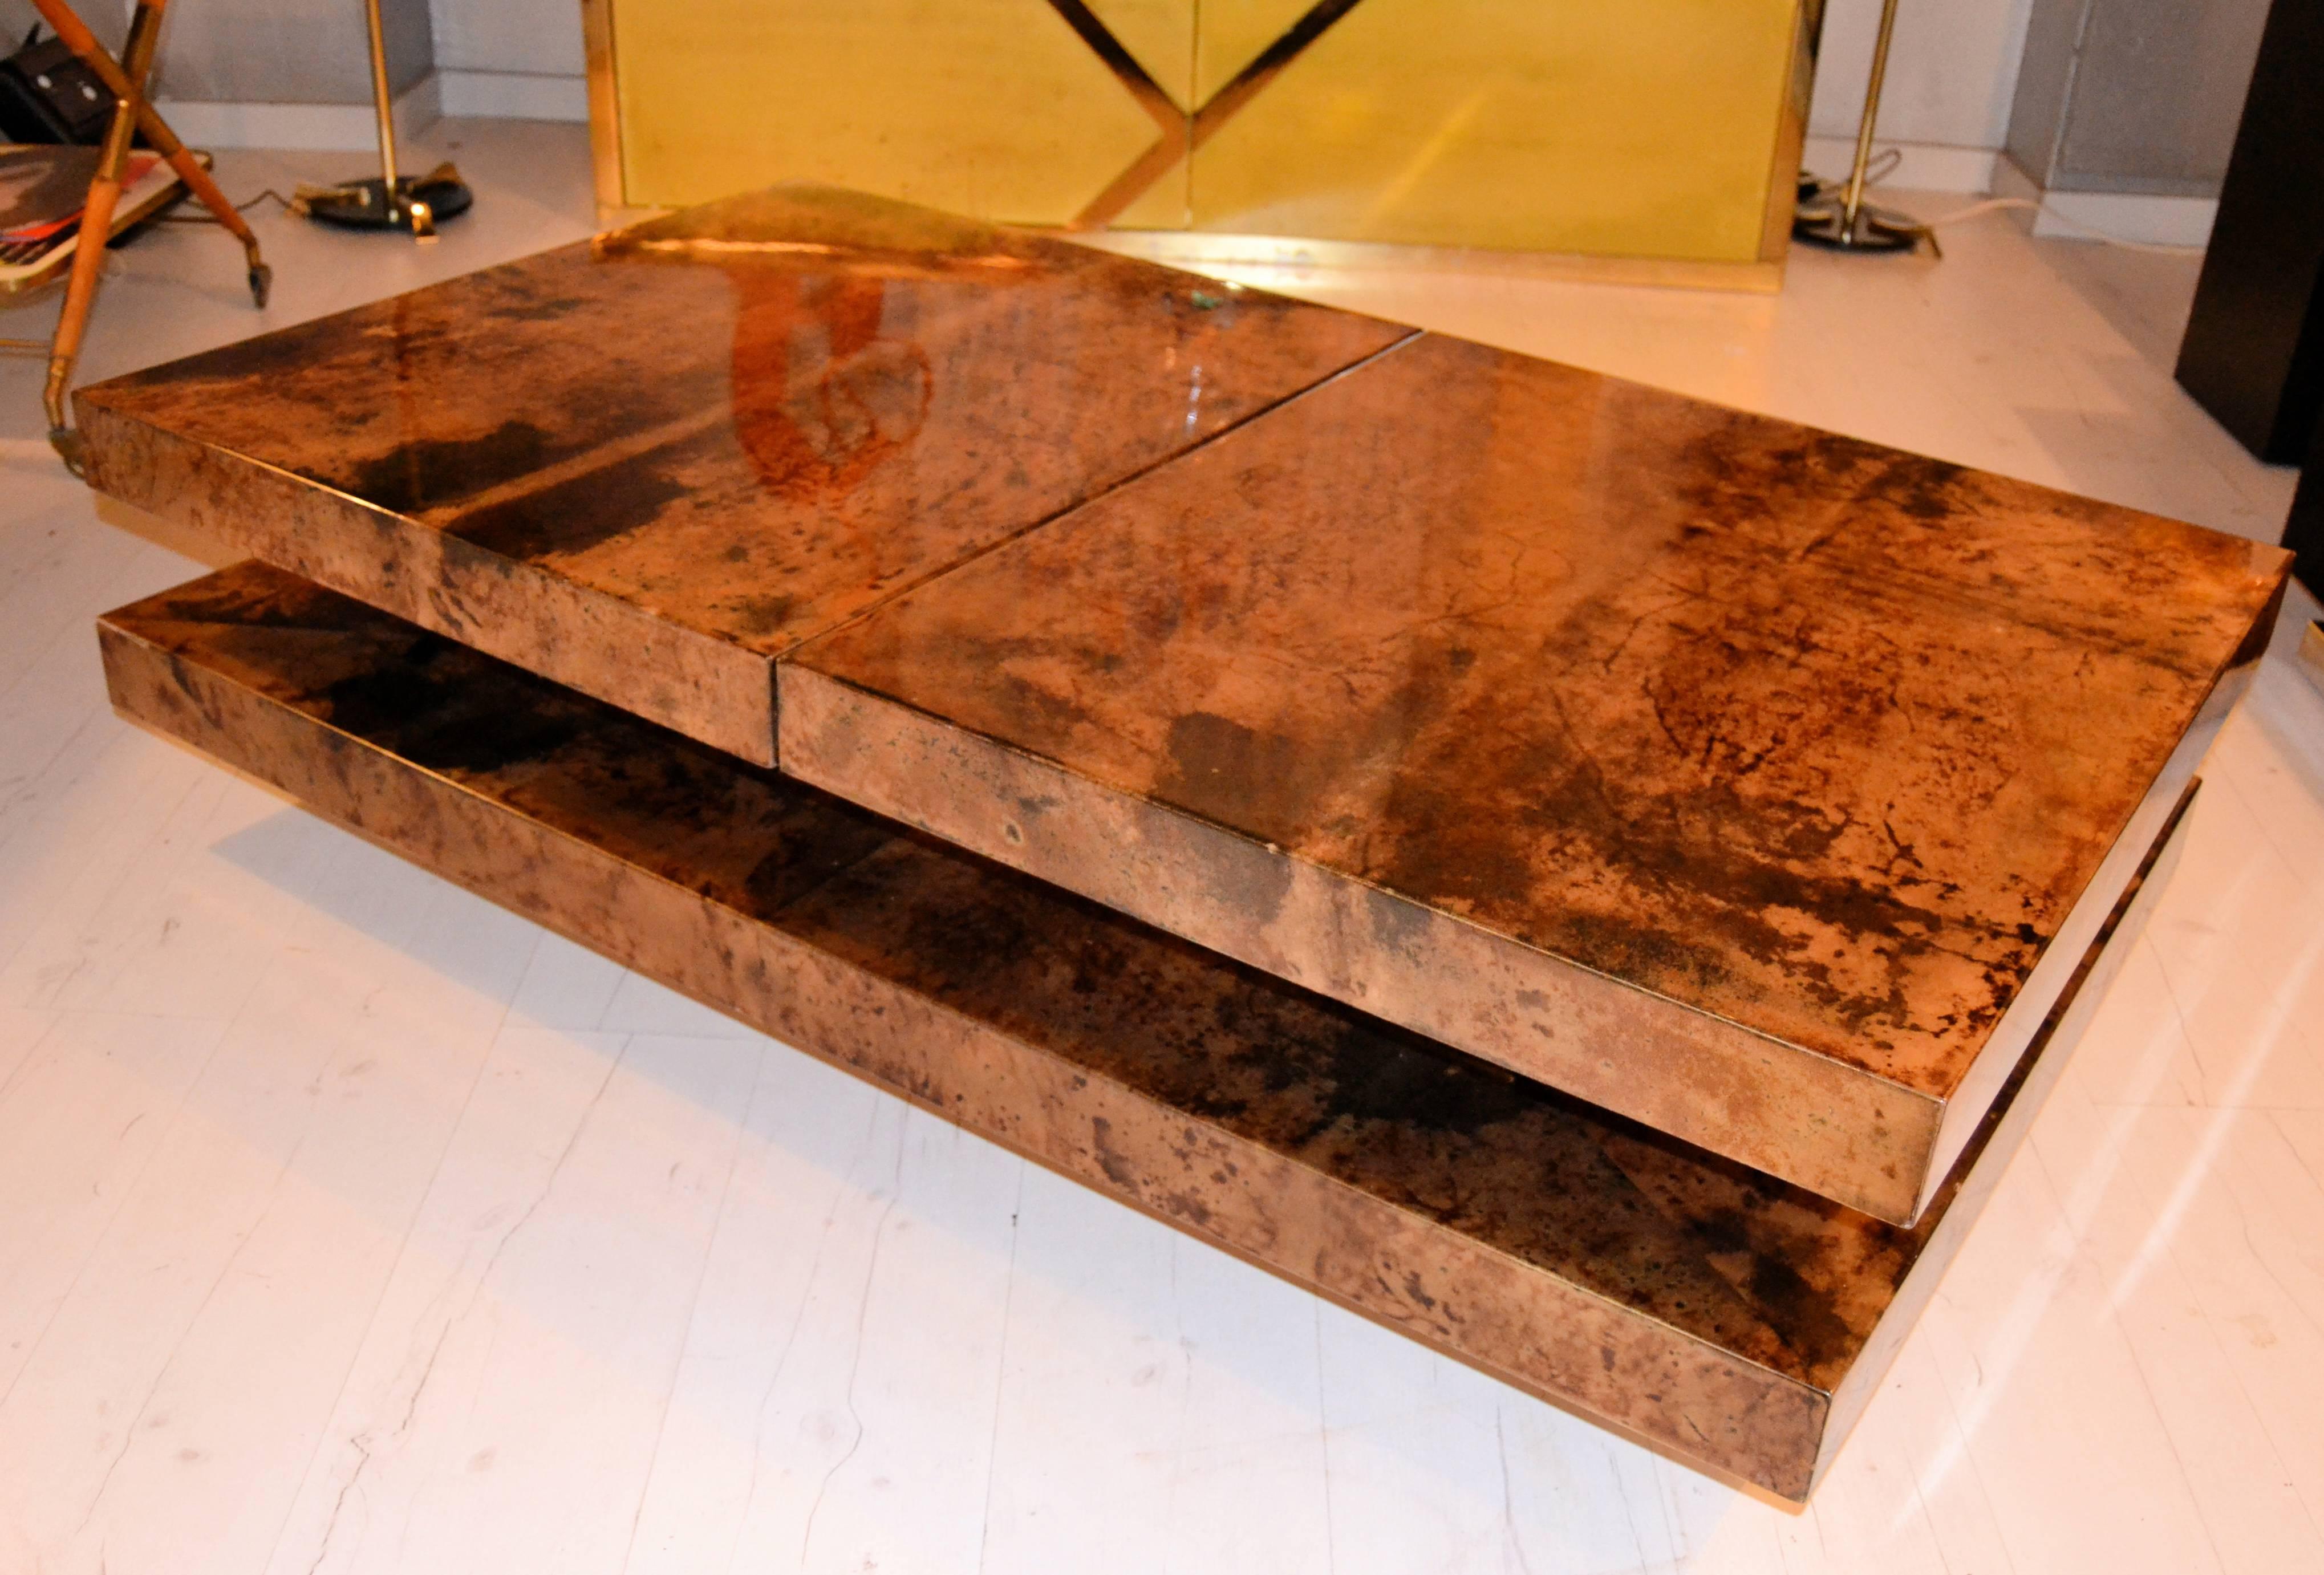 1970s coffee table in tinted and lacquered goatskin with sliding top. The table have a mirrored interior bar. Created by the Italian designer Aldo Tura in the late 1970s.
Great vintage condition.
The measurements given is when it’s close.